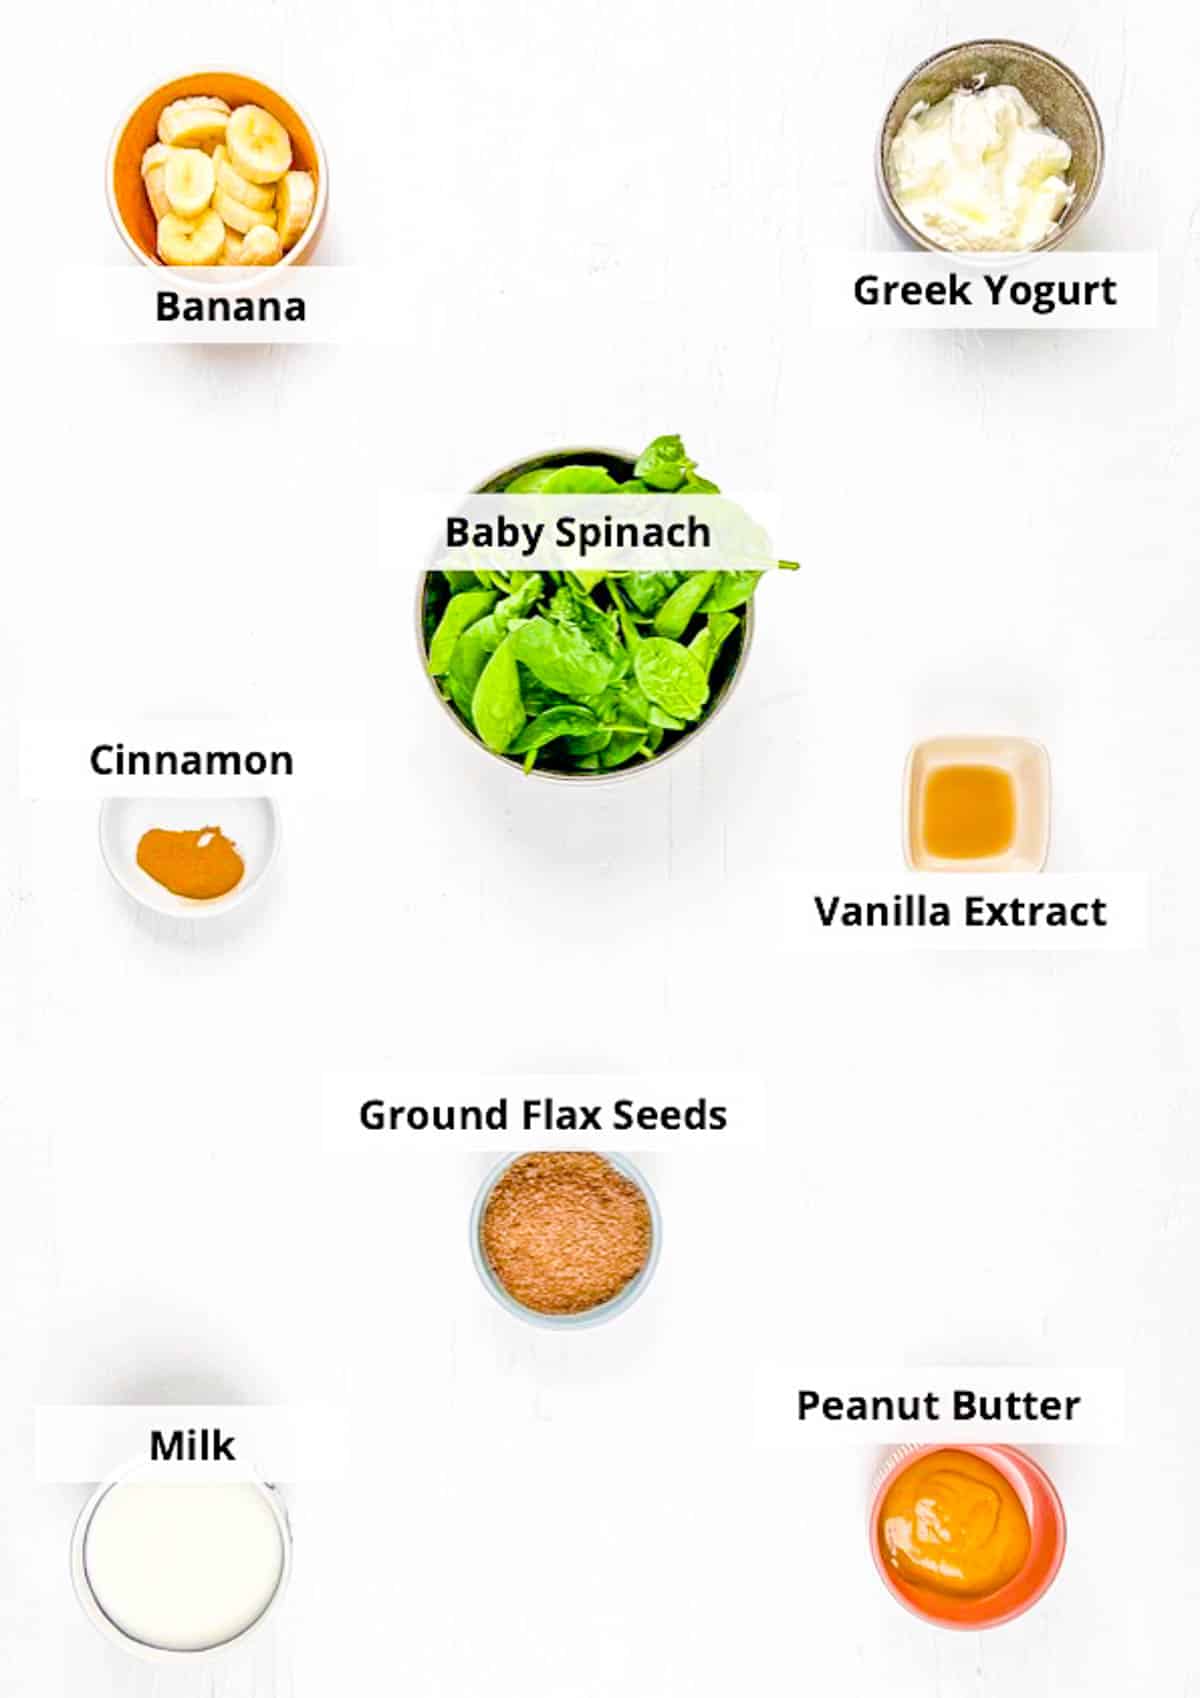 Ingredients for spinach and banana smoothie recipe on a white background.